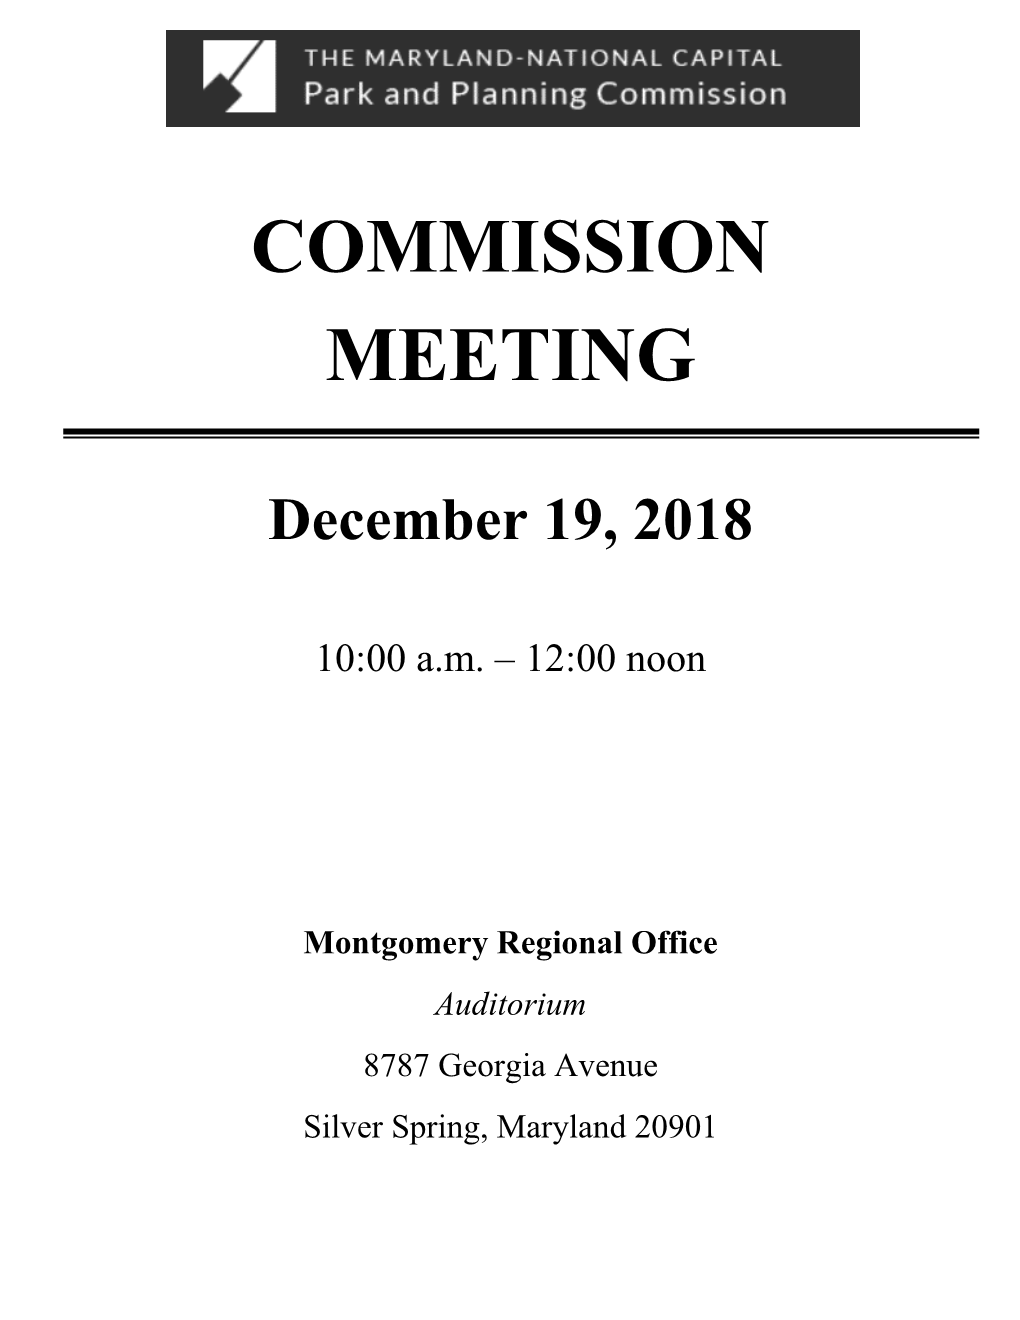 Commission Meeting